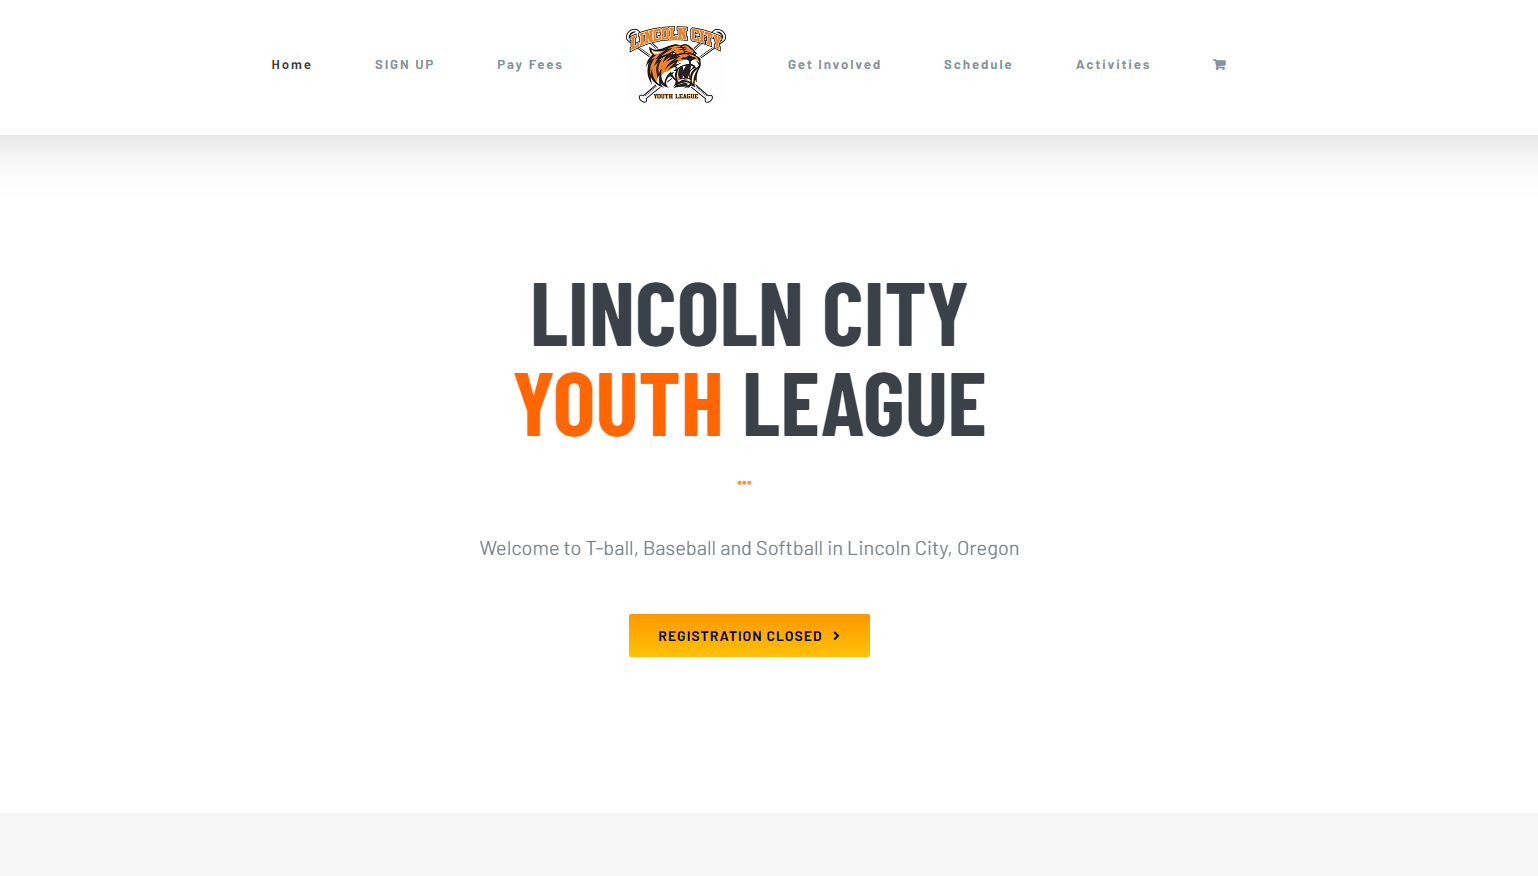 Lincoln City Youth League